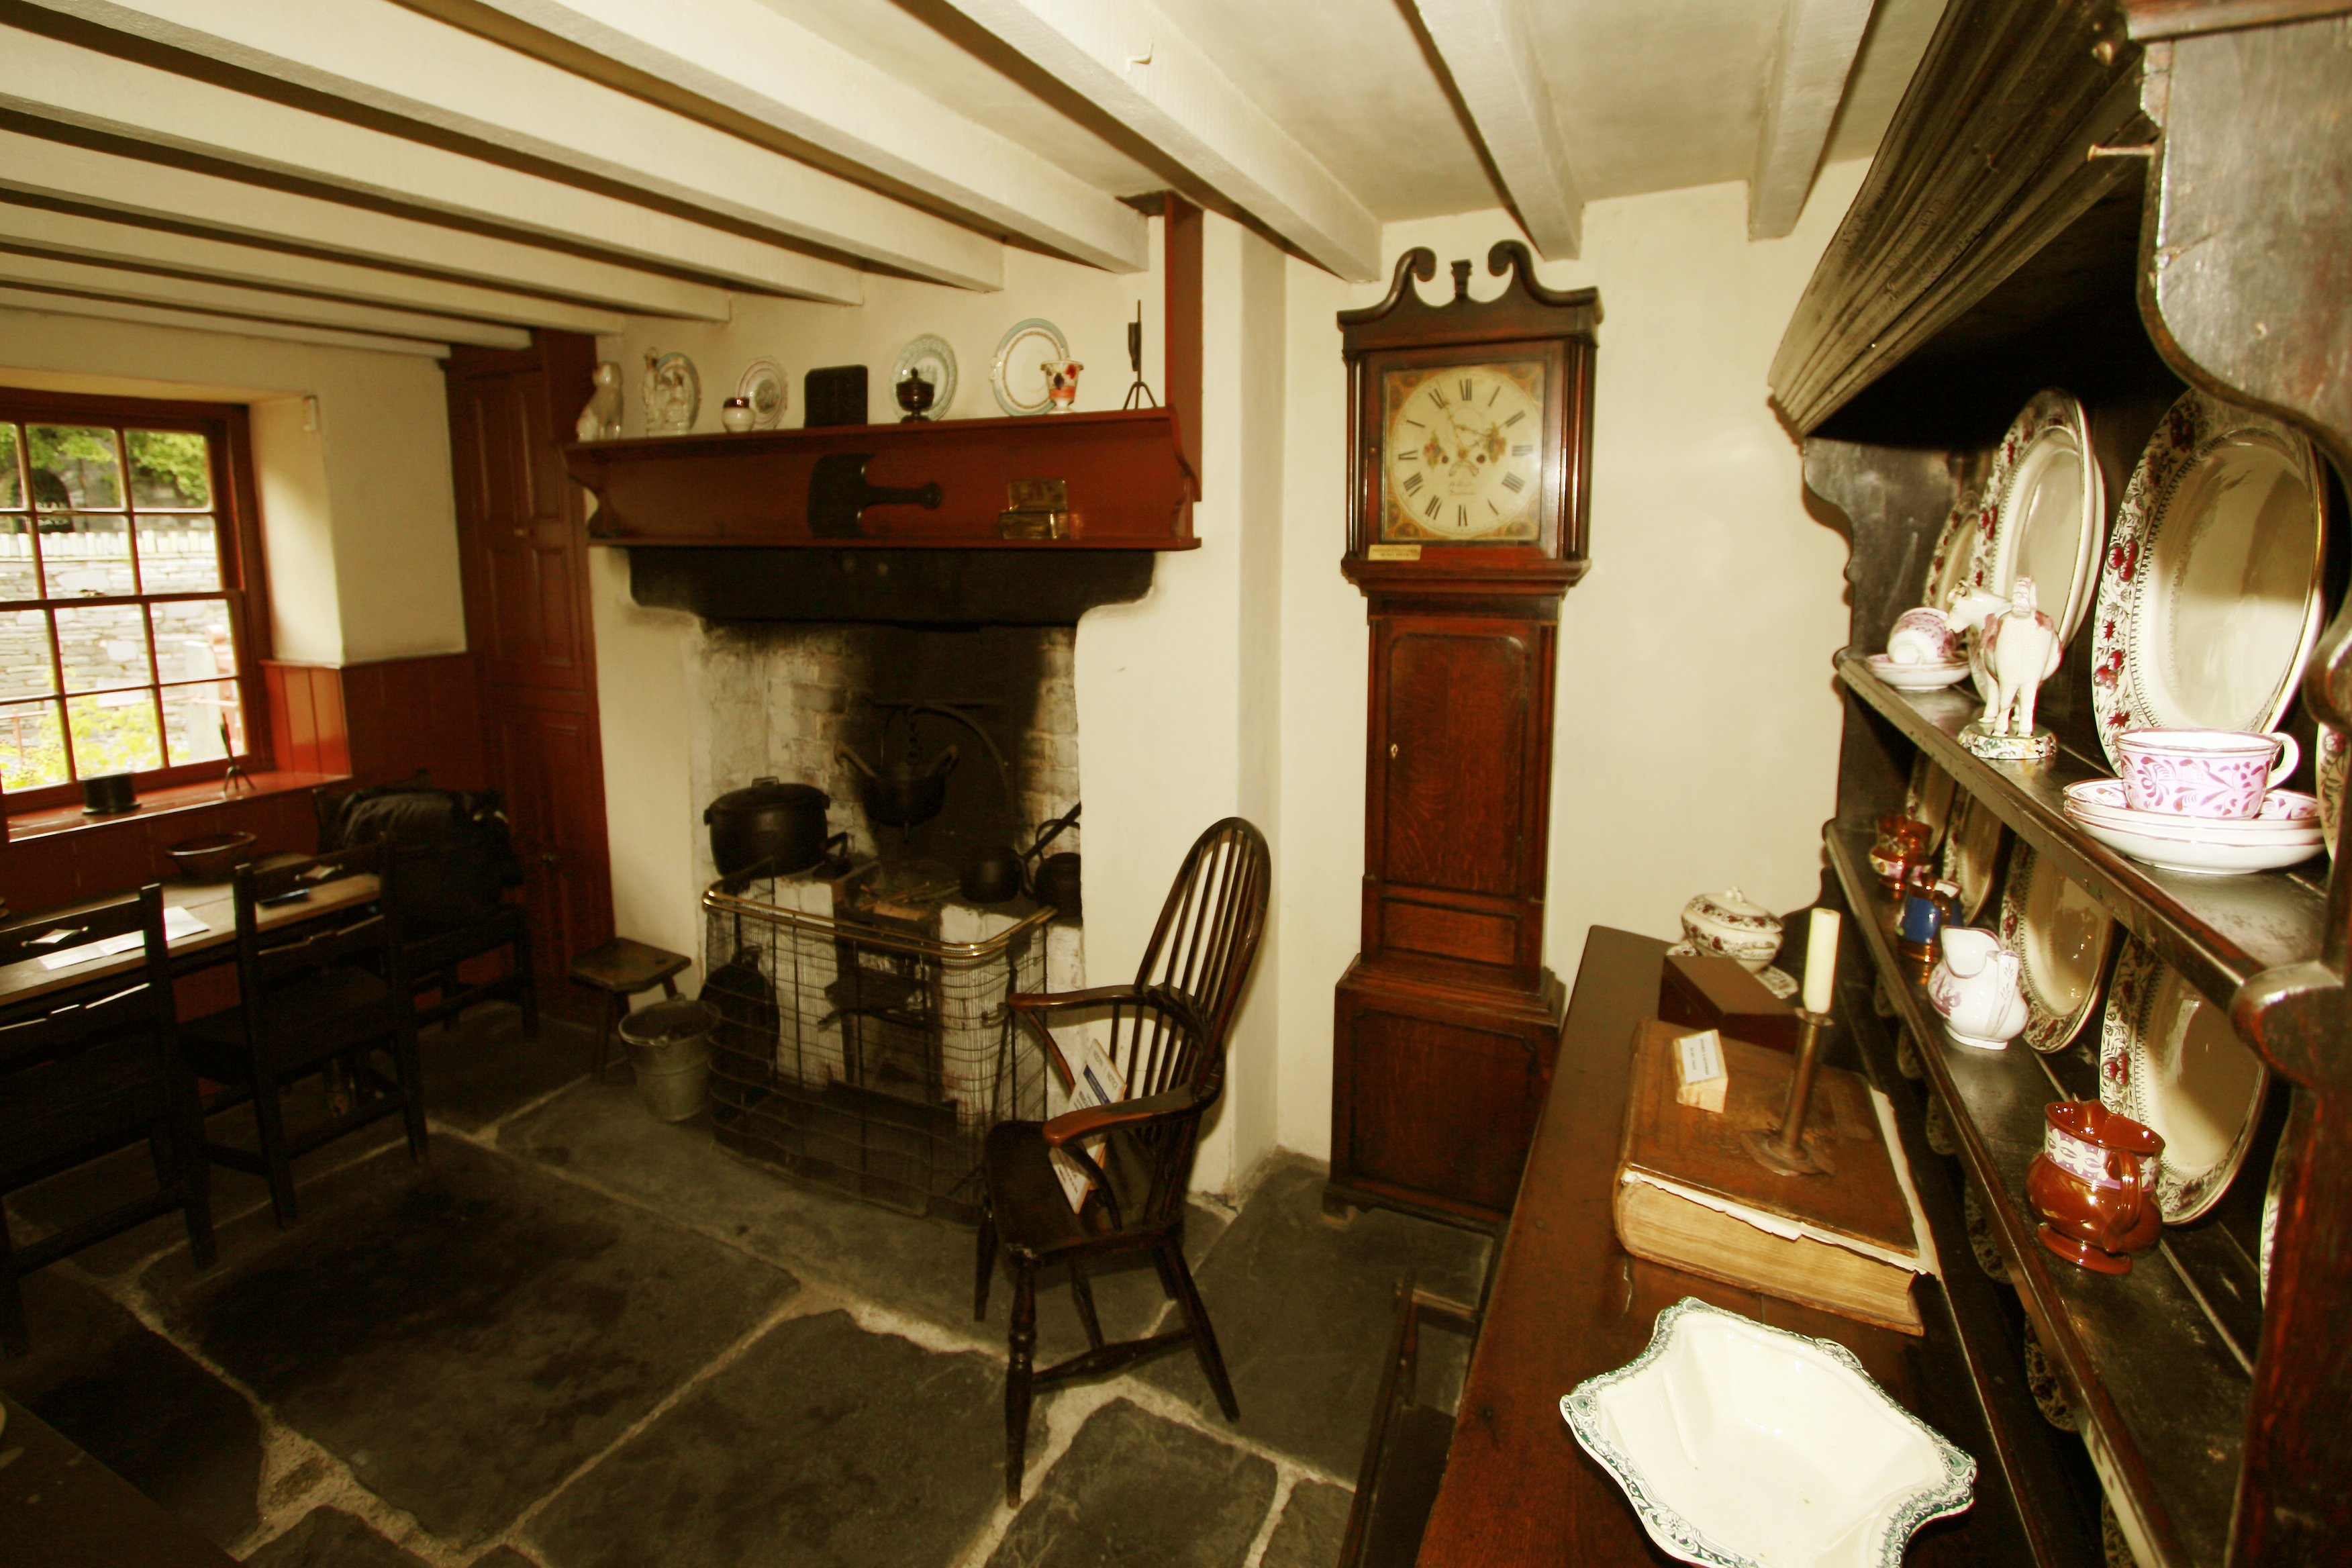 Front room of the Quarrymen's houses